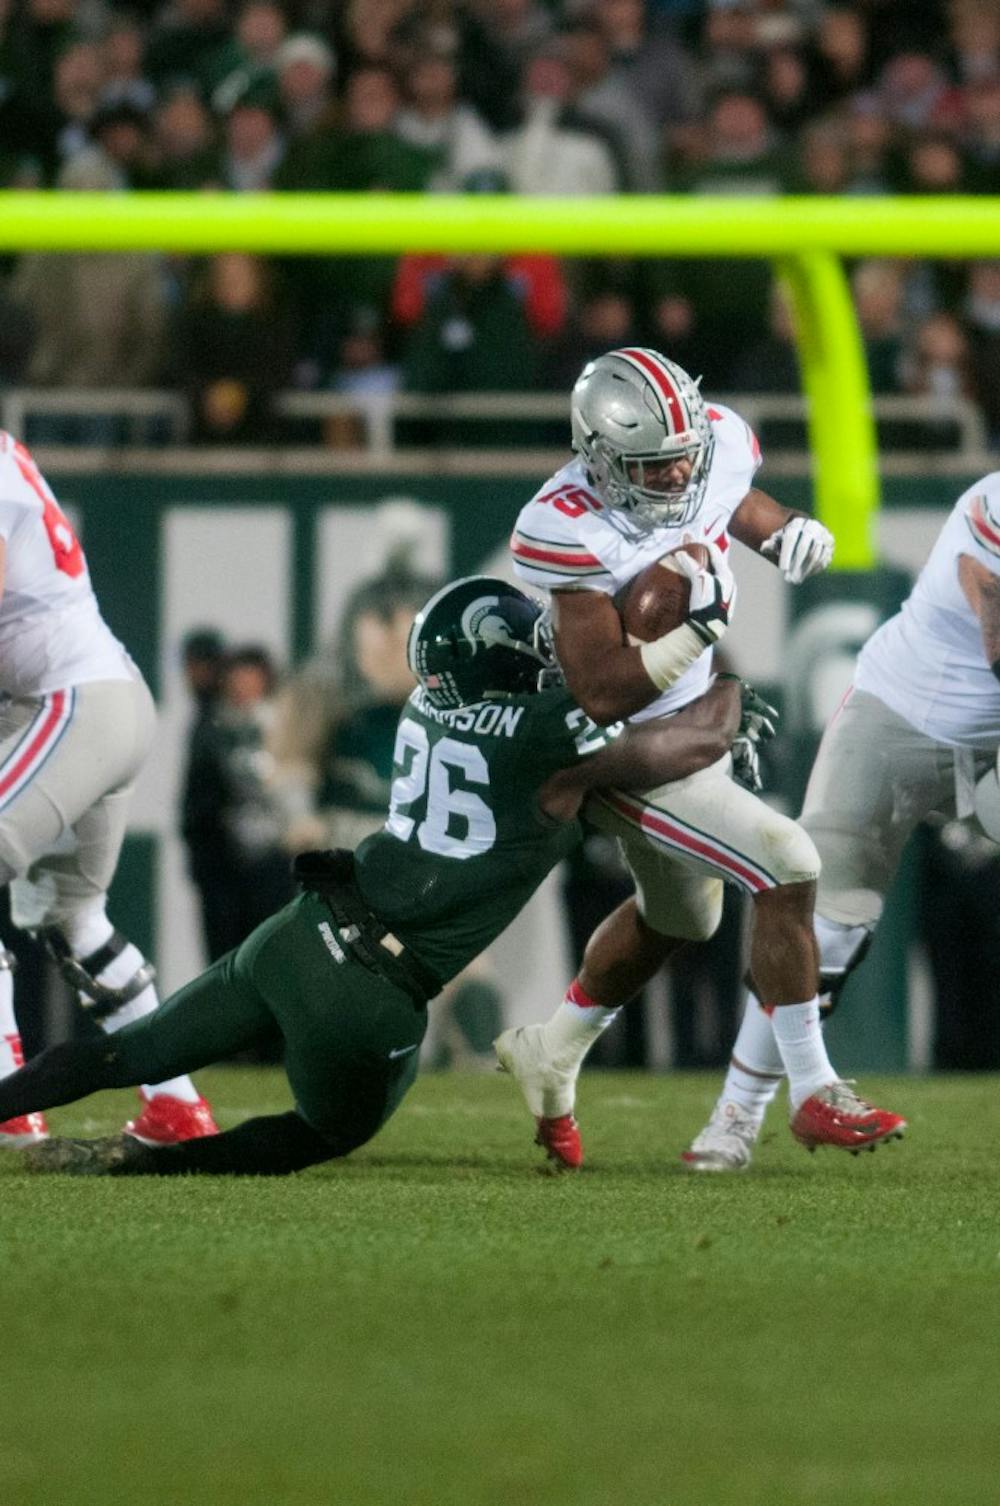 <p>Junior safety RJ Williamson tackles Ohio State running back Ezekiel Elliott during the game against Ohio State on Nov. 8, 2014 at Spartan Stadium. The Buckeyes defeated the Spartans, 49-37. Jessalyn Tamez/The State News </p>